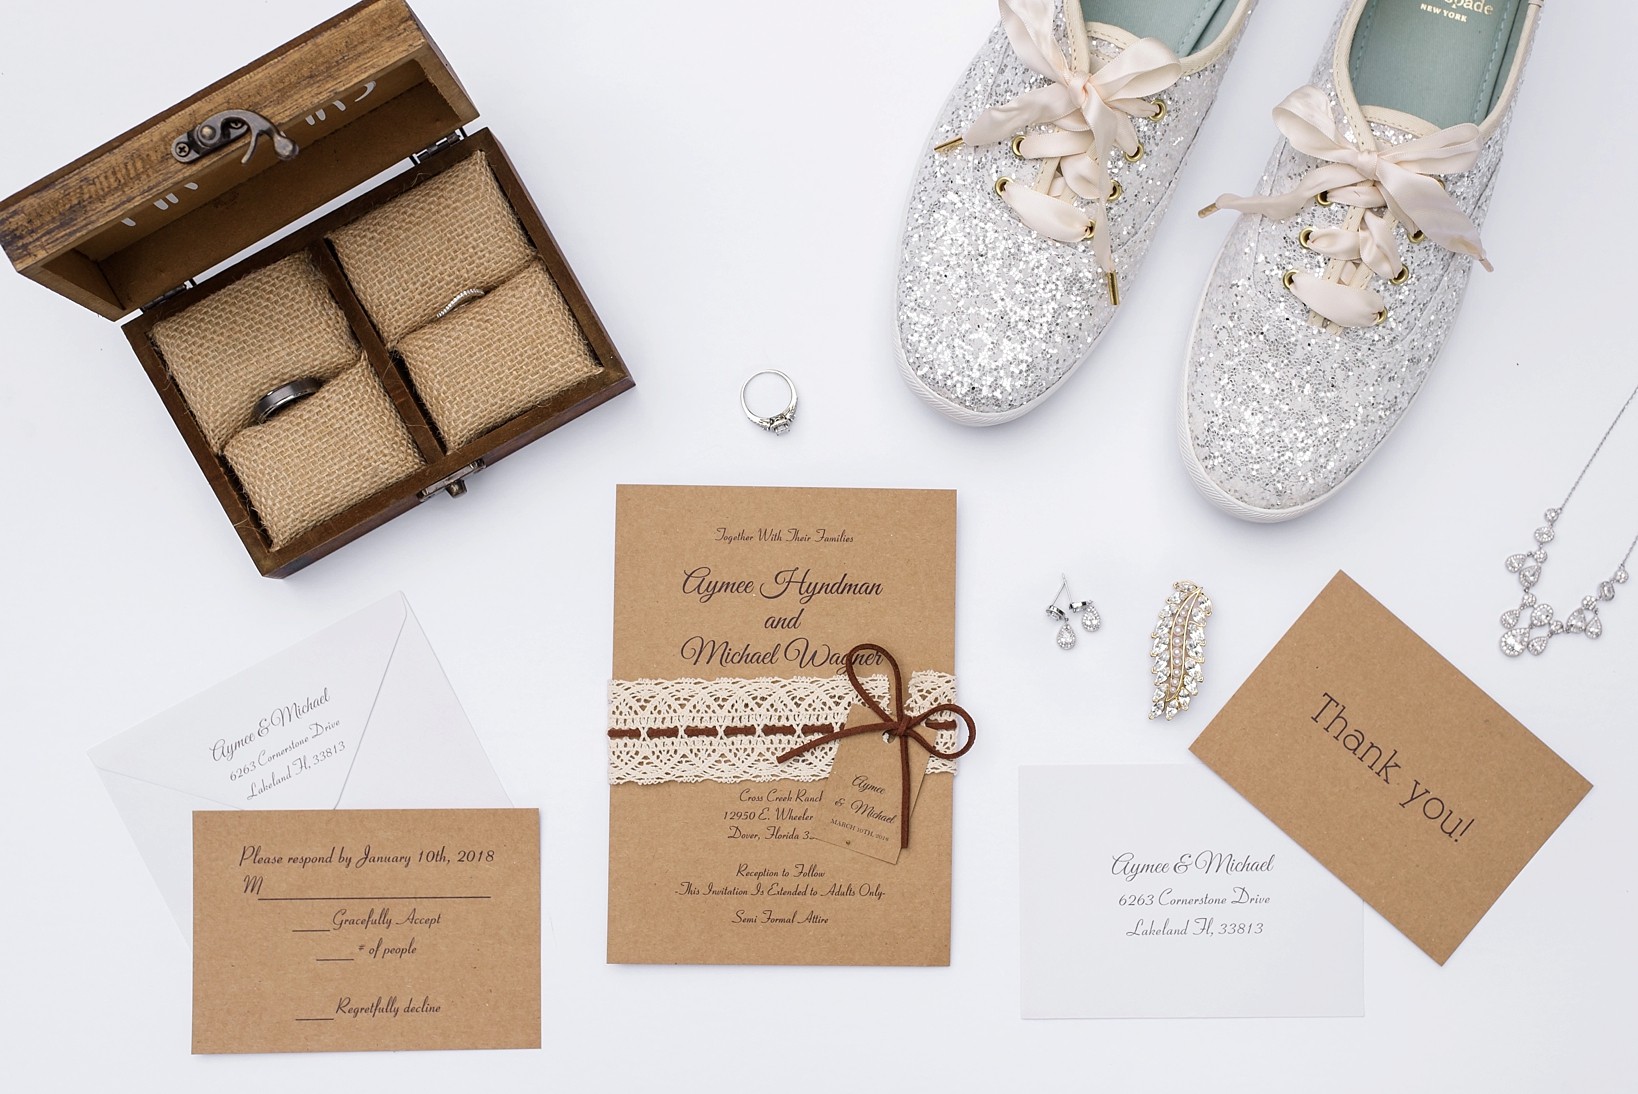 Kate Spade Wedding shoes surrounded by wedding invitations and bride's jewellery 